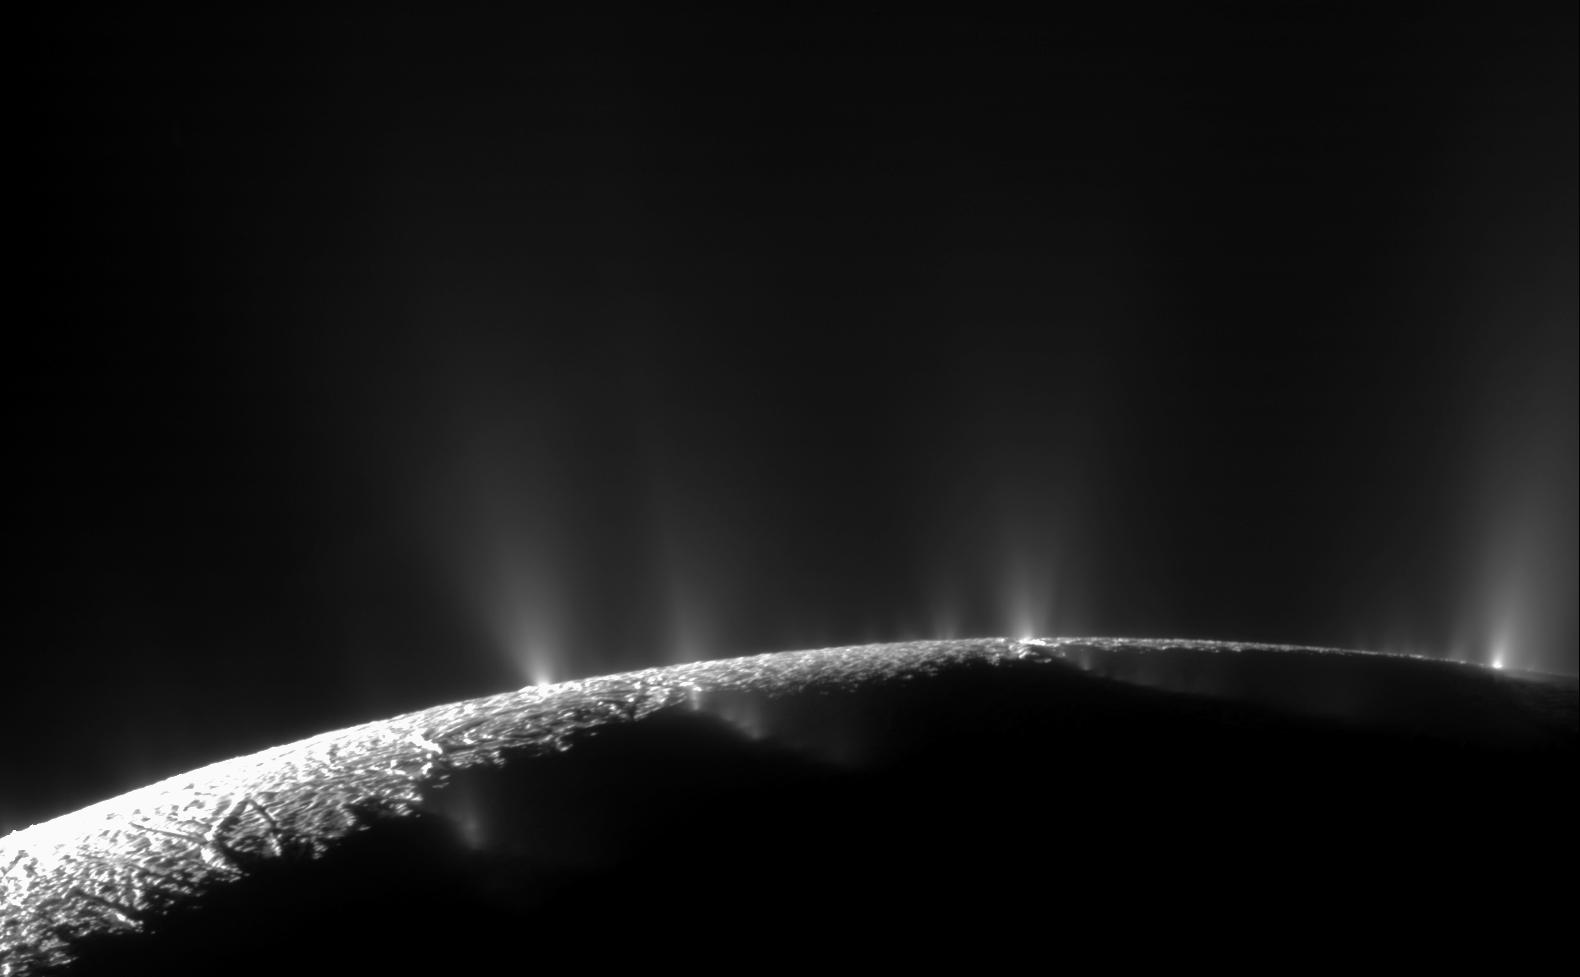 The curve of Enceladus with white spray above